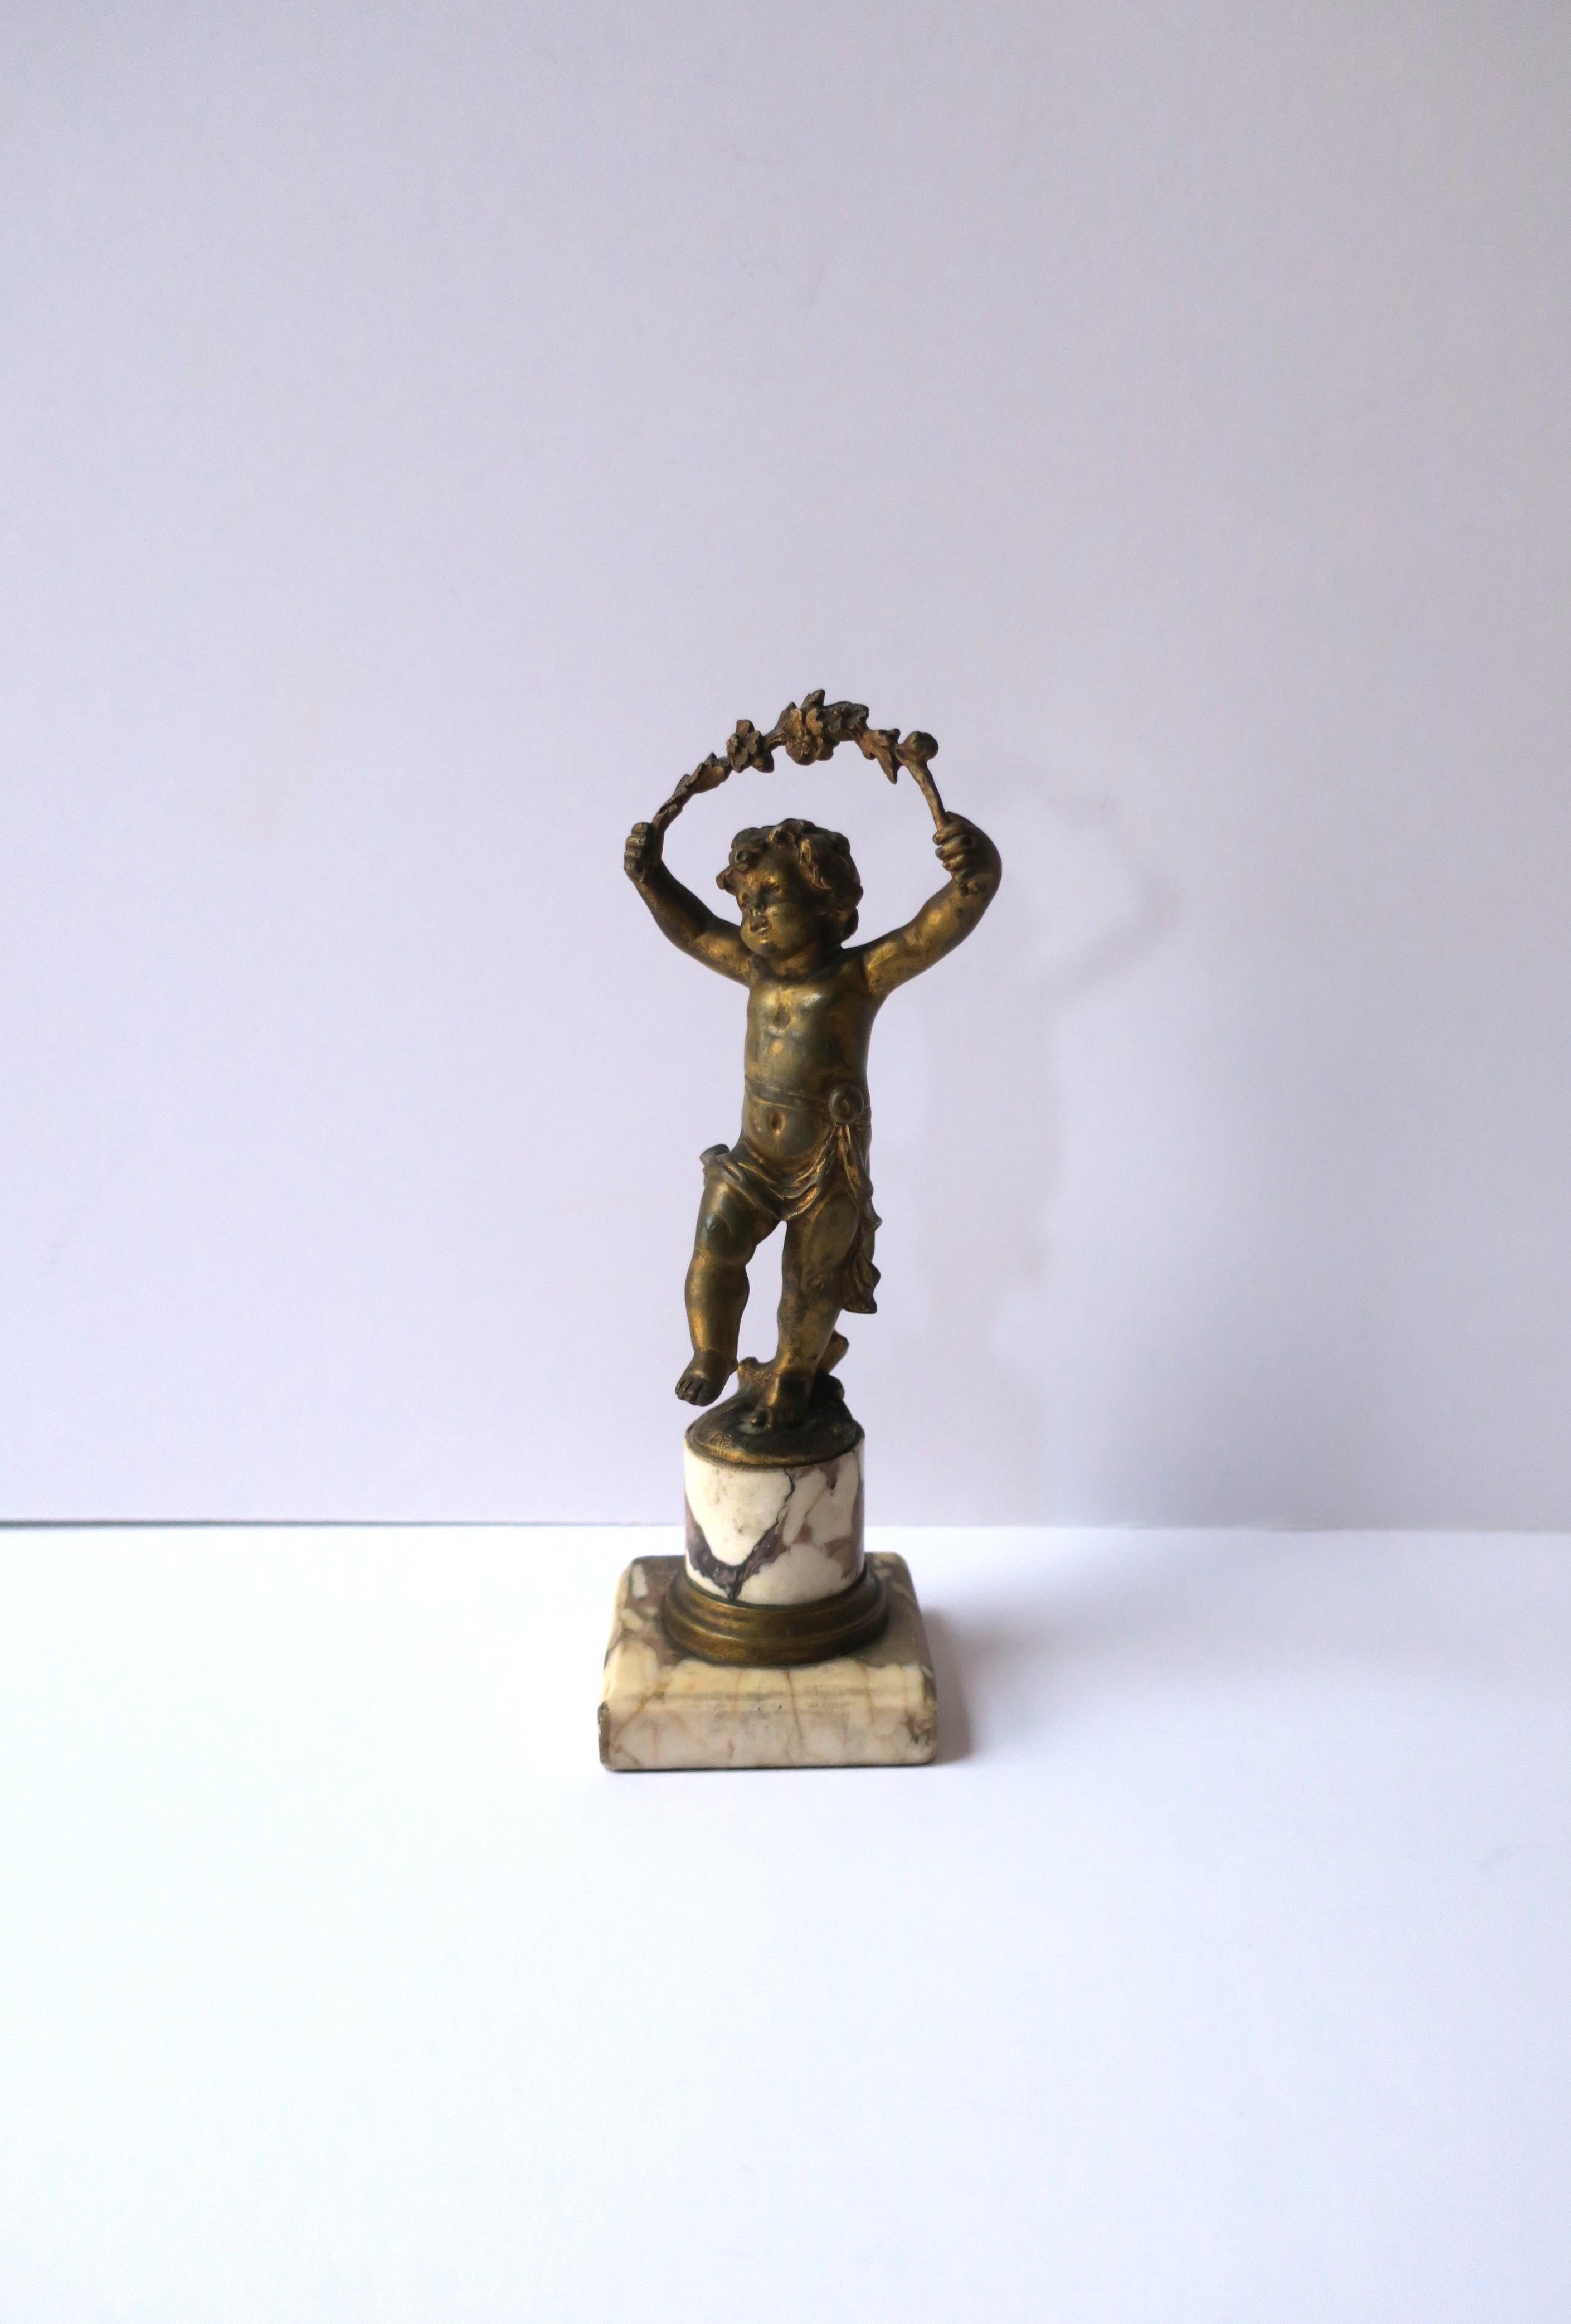 An antique French gold gilt bronze male 'putti' figure sculpture atop a marble column, Belle Epoque, circa late-19th century, France. A substantial patinated gold gilt bronze male 'putti' mounted on a marble column and base. A great decorative